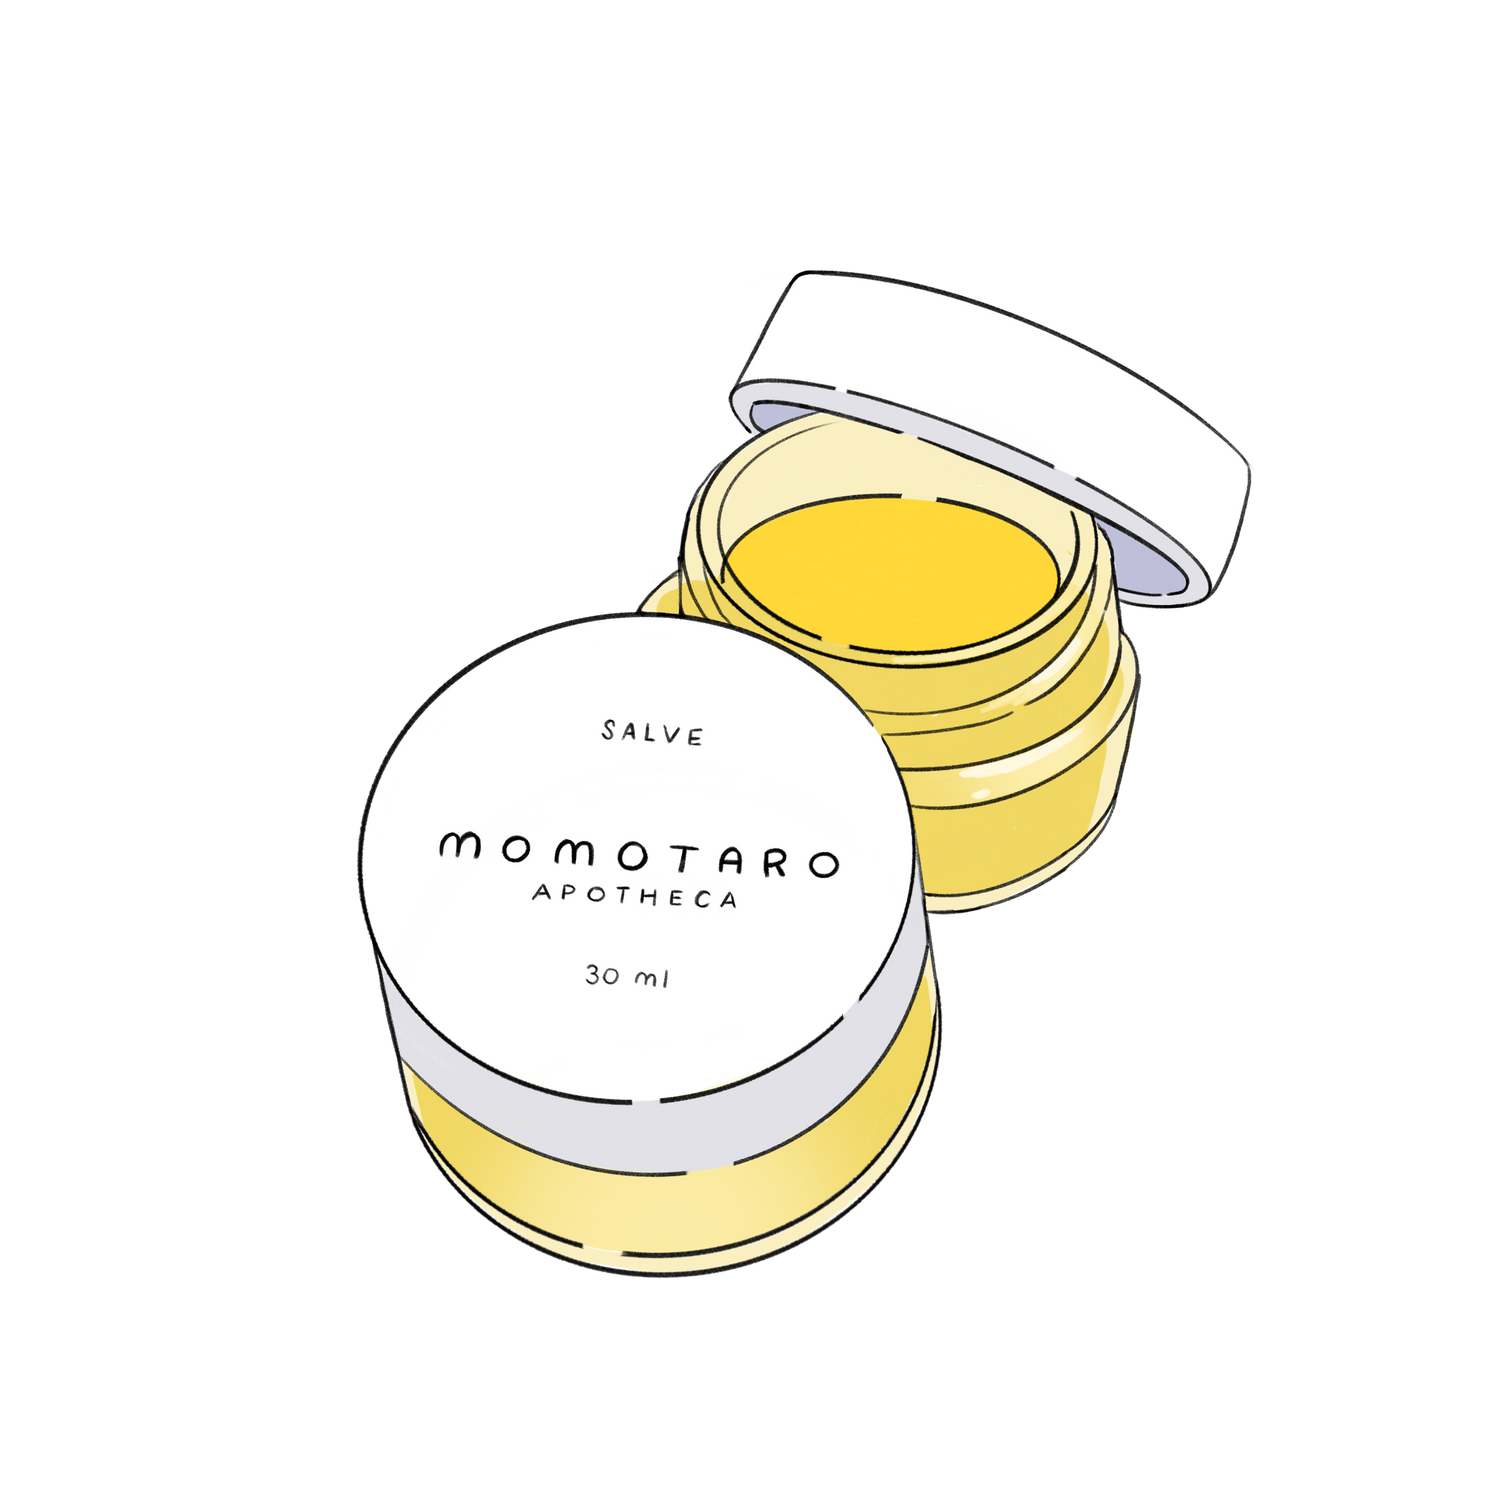 illustration of Momotaro Apotheca Salve jar for yeast infection and BV